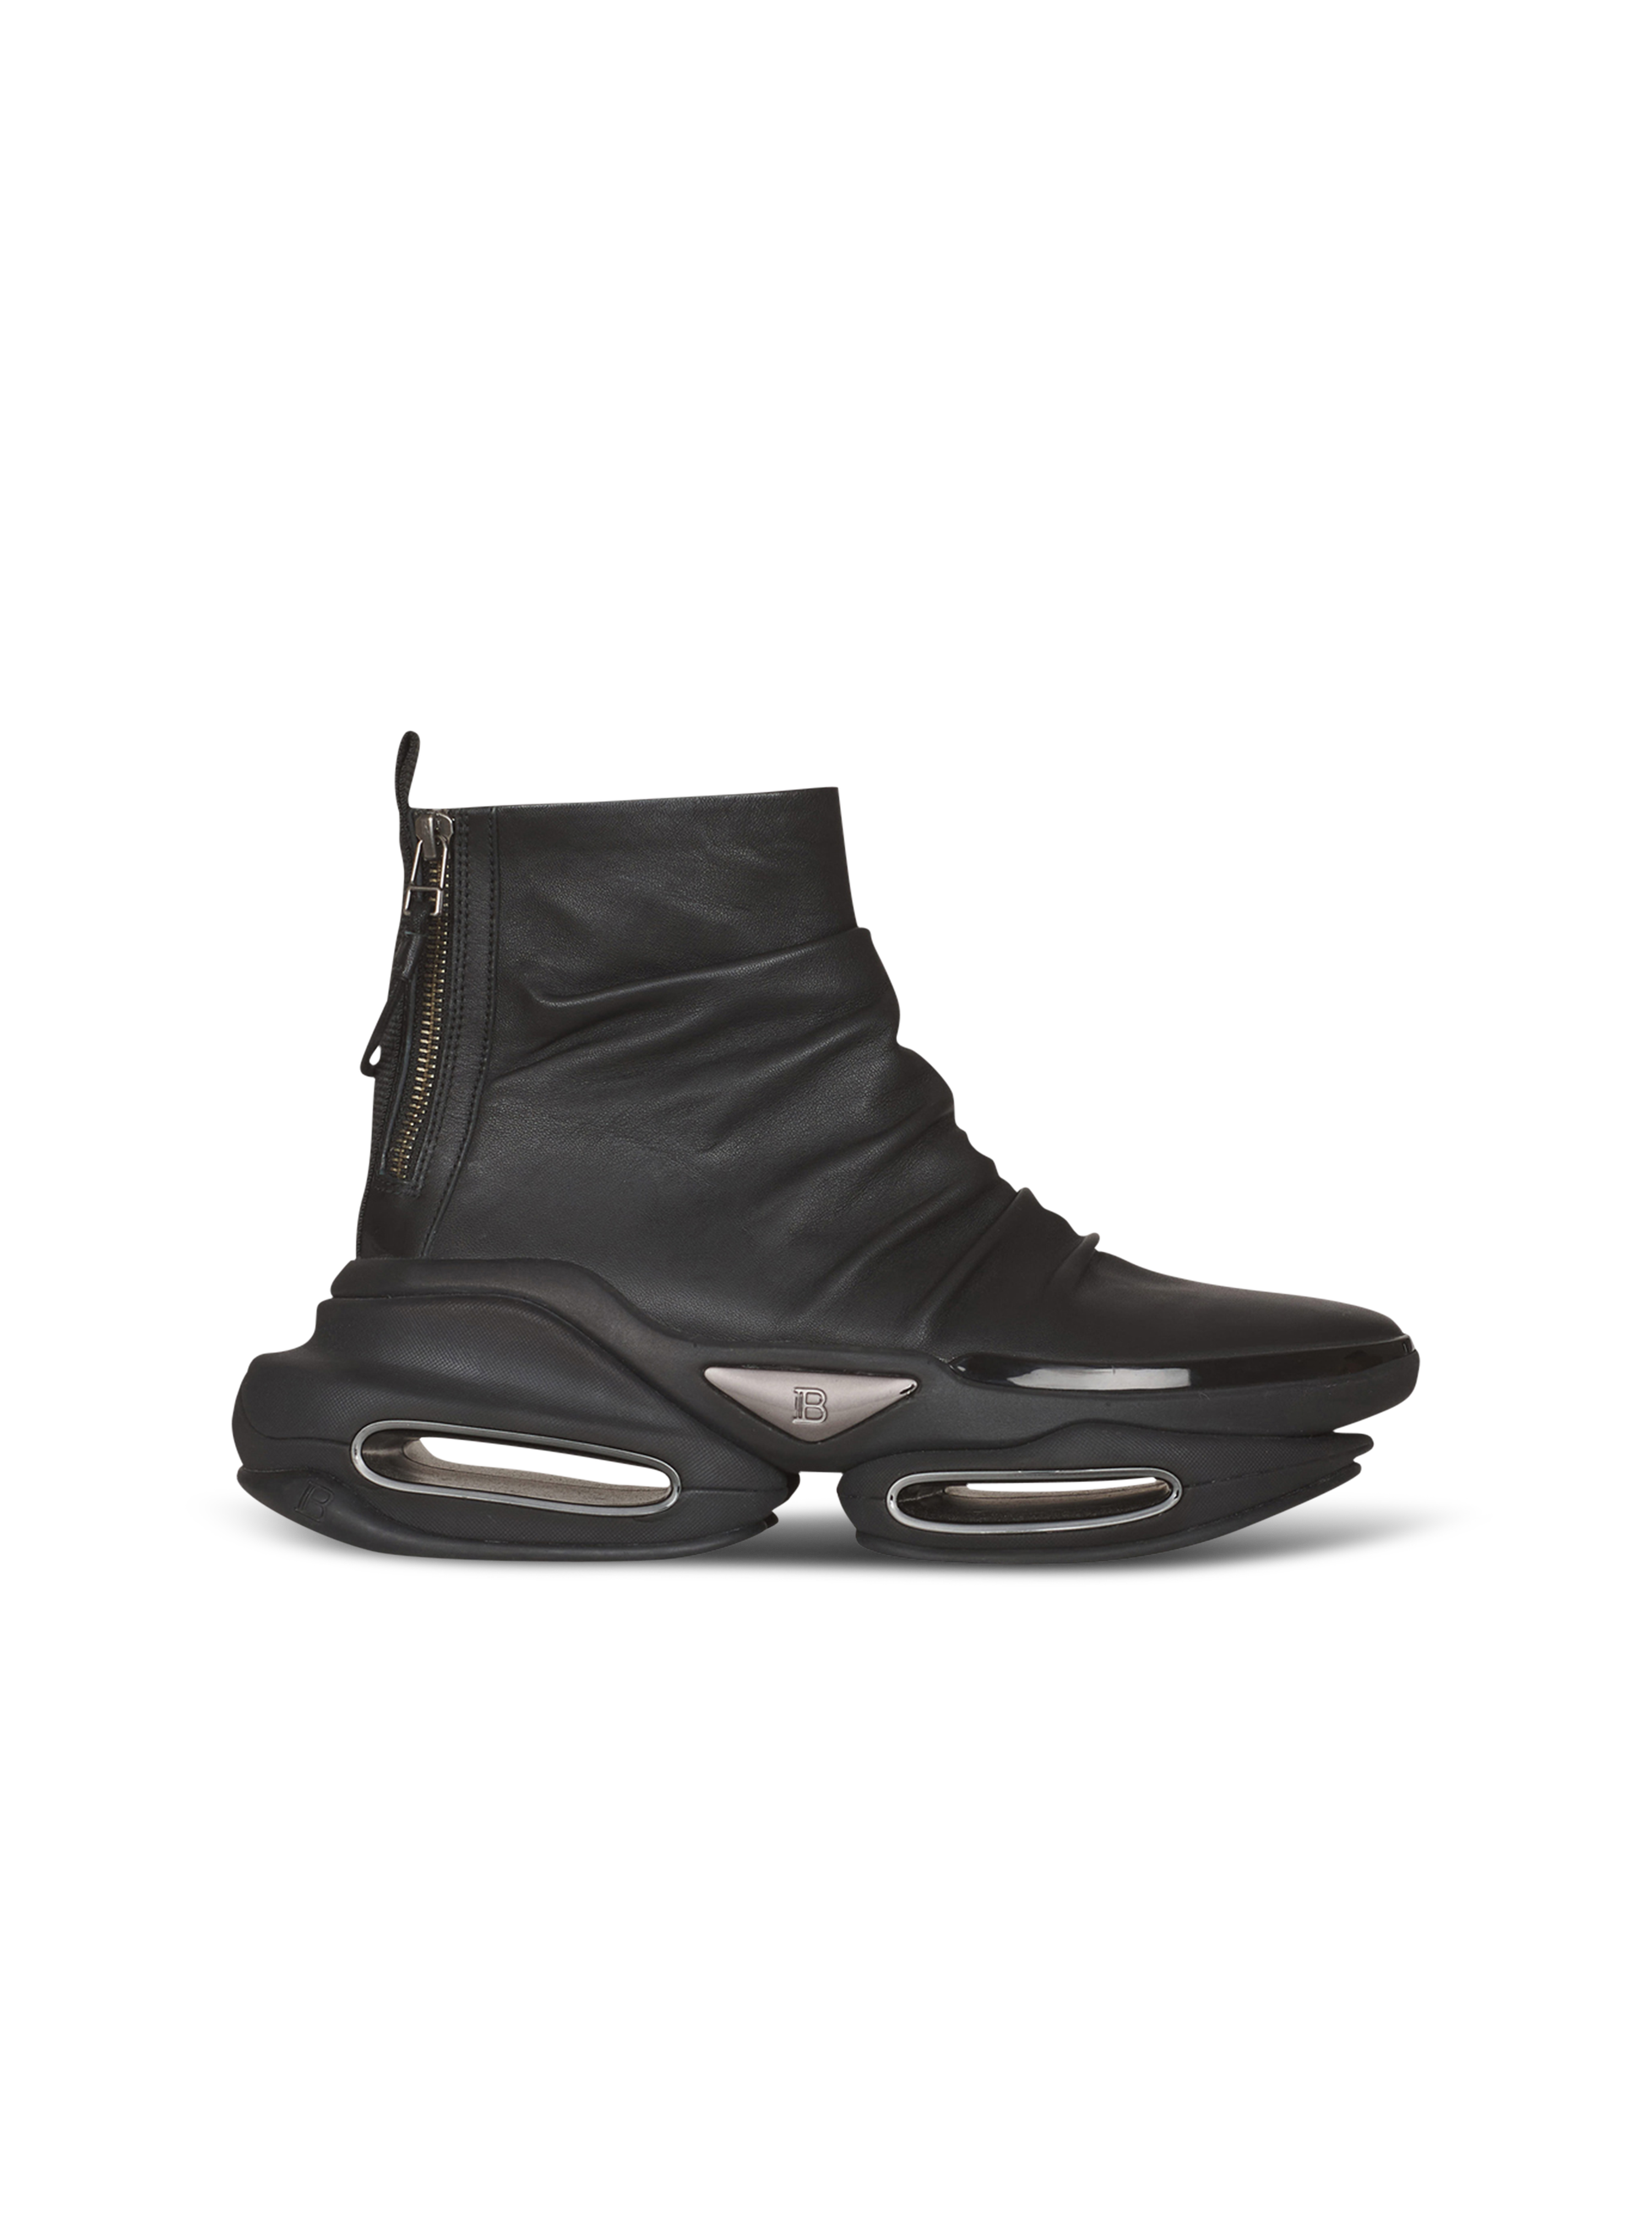 Draped leather B-Bold high-top sneakers, black, hi-res